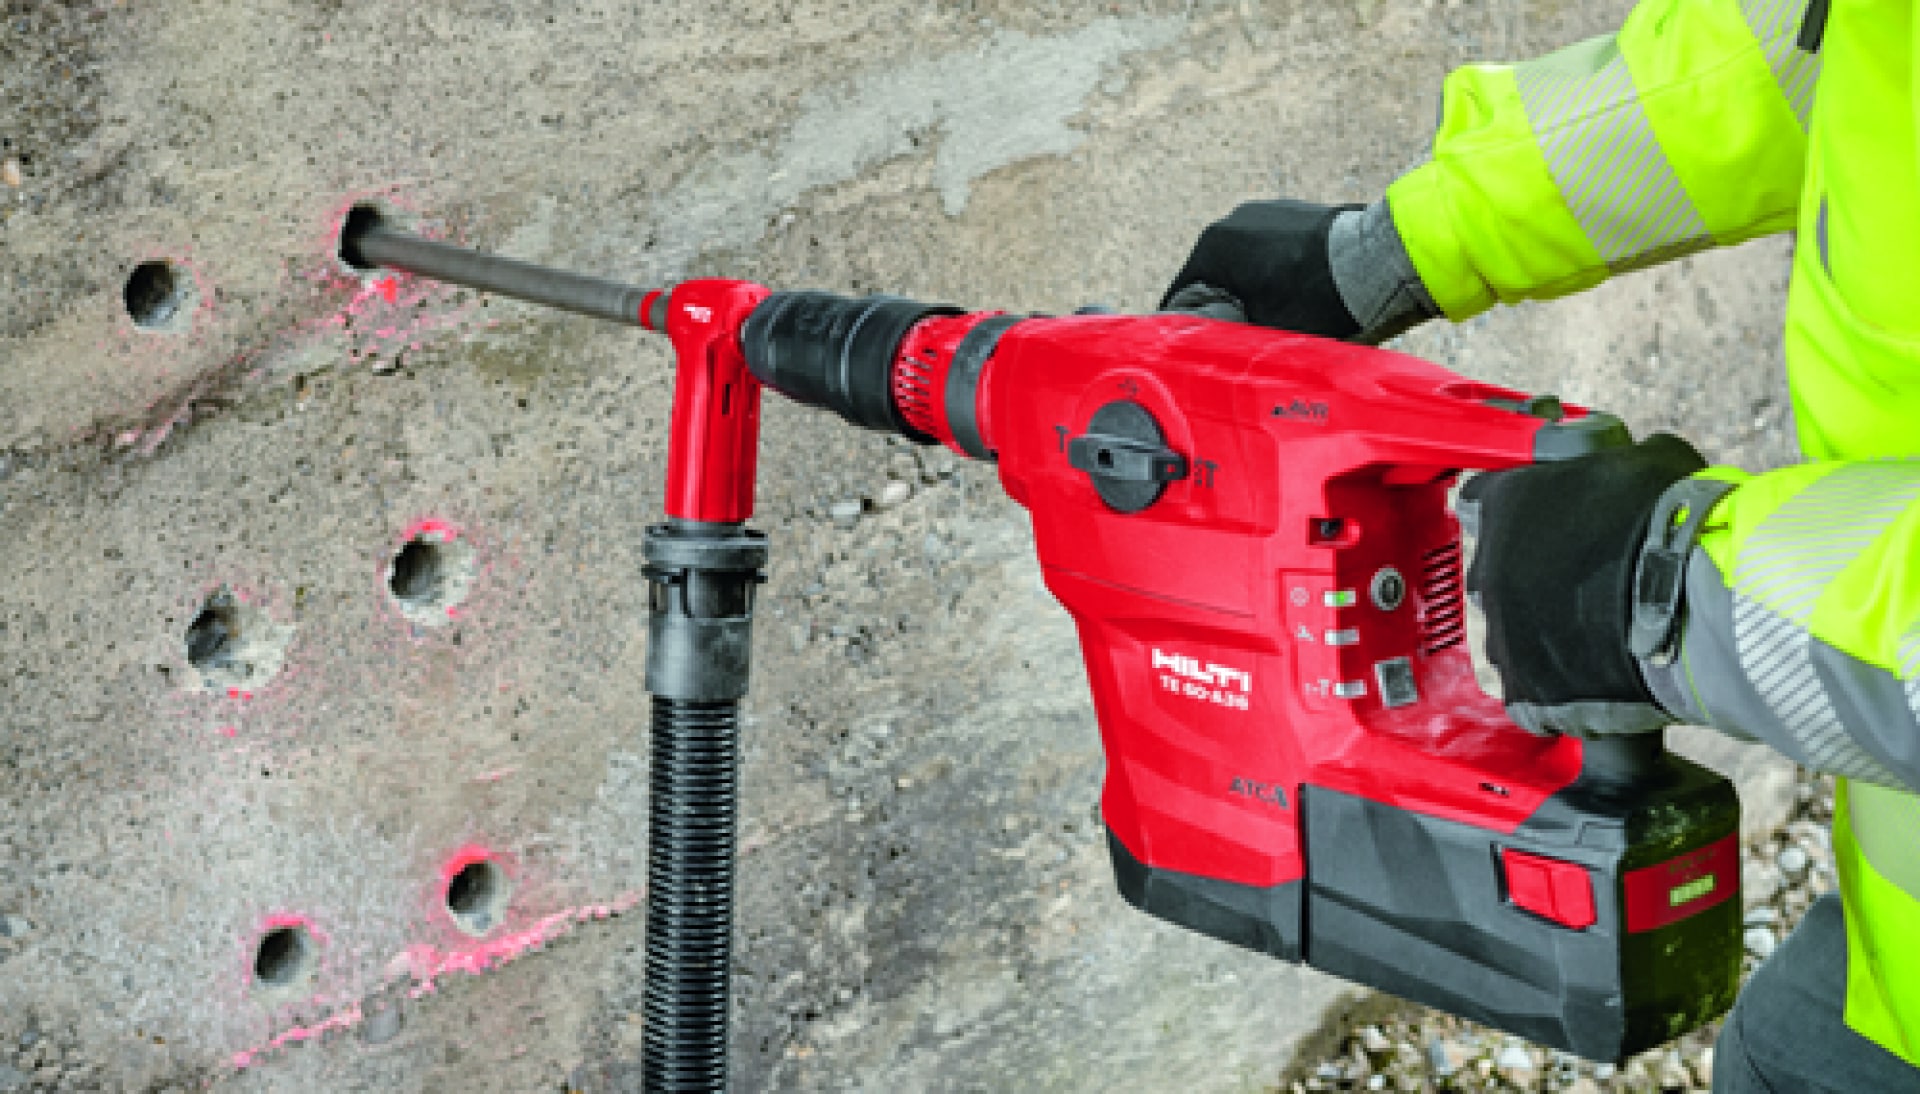 TE 60-A36 with dust removal system drilling holes in concrete wall